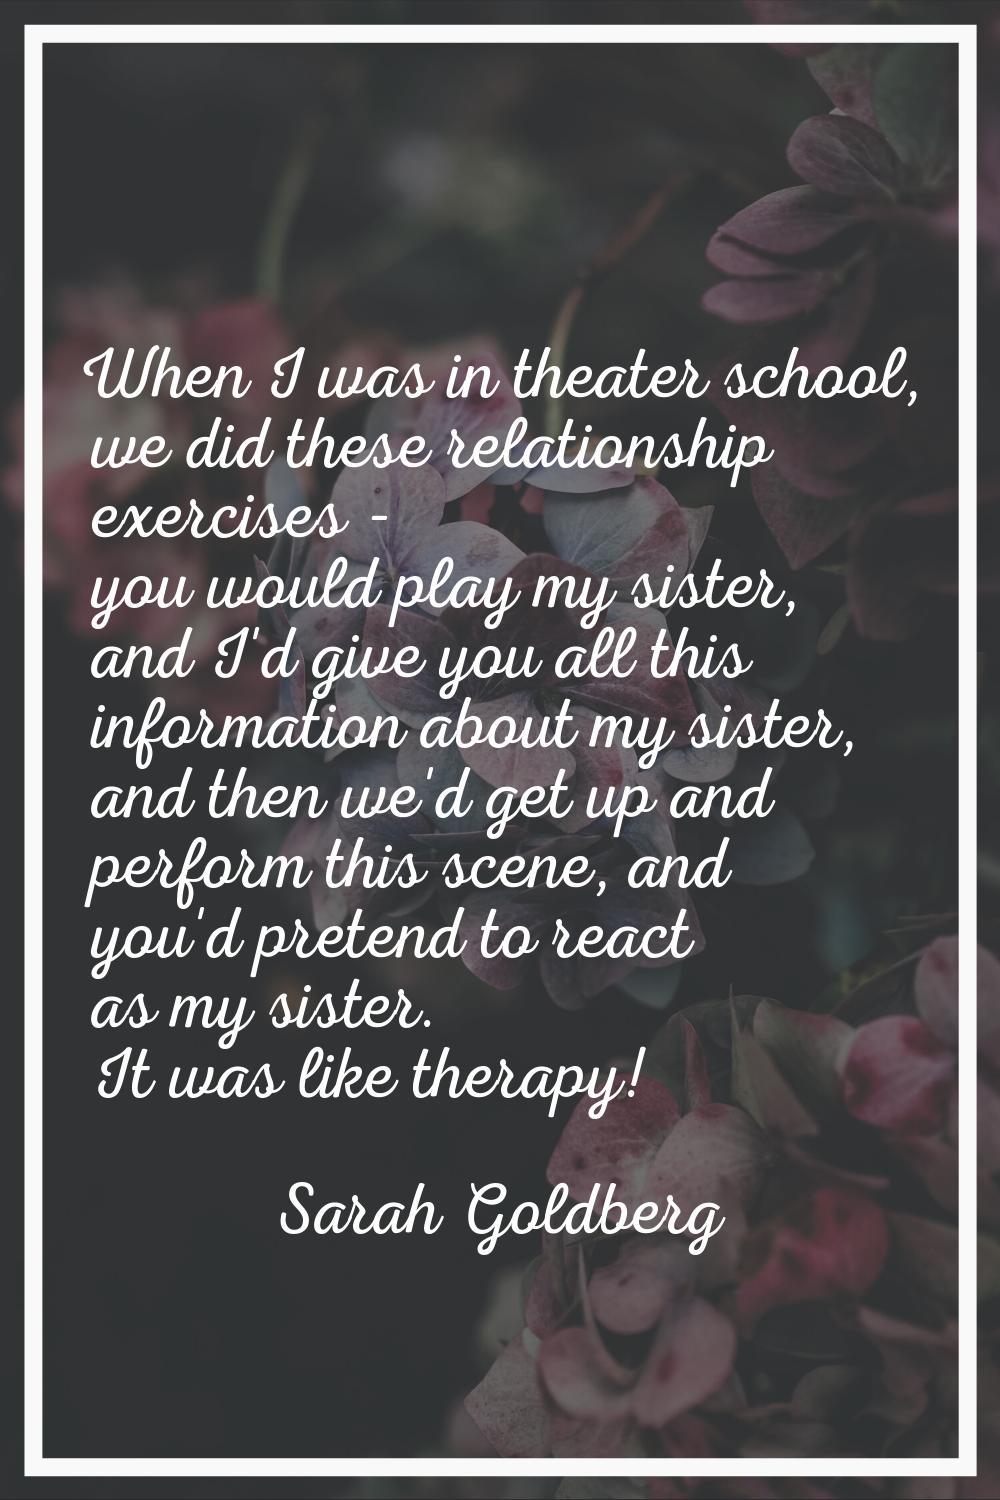 When I was in theater school, we did these relationship exercises - you would play my sister, and I